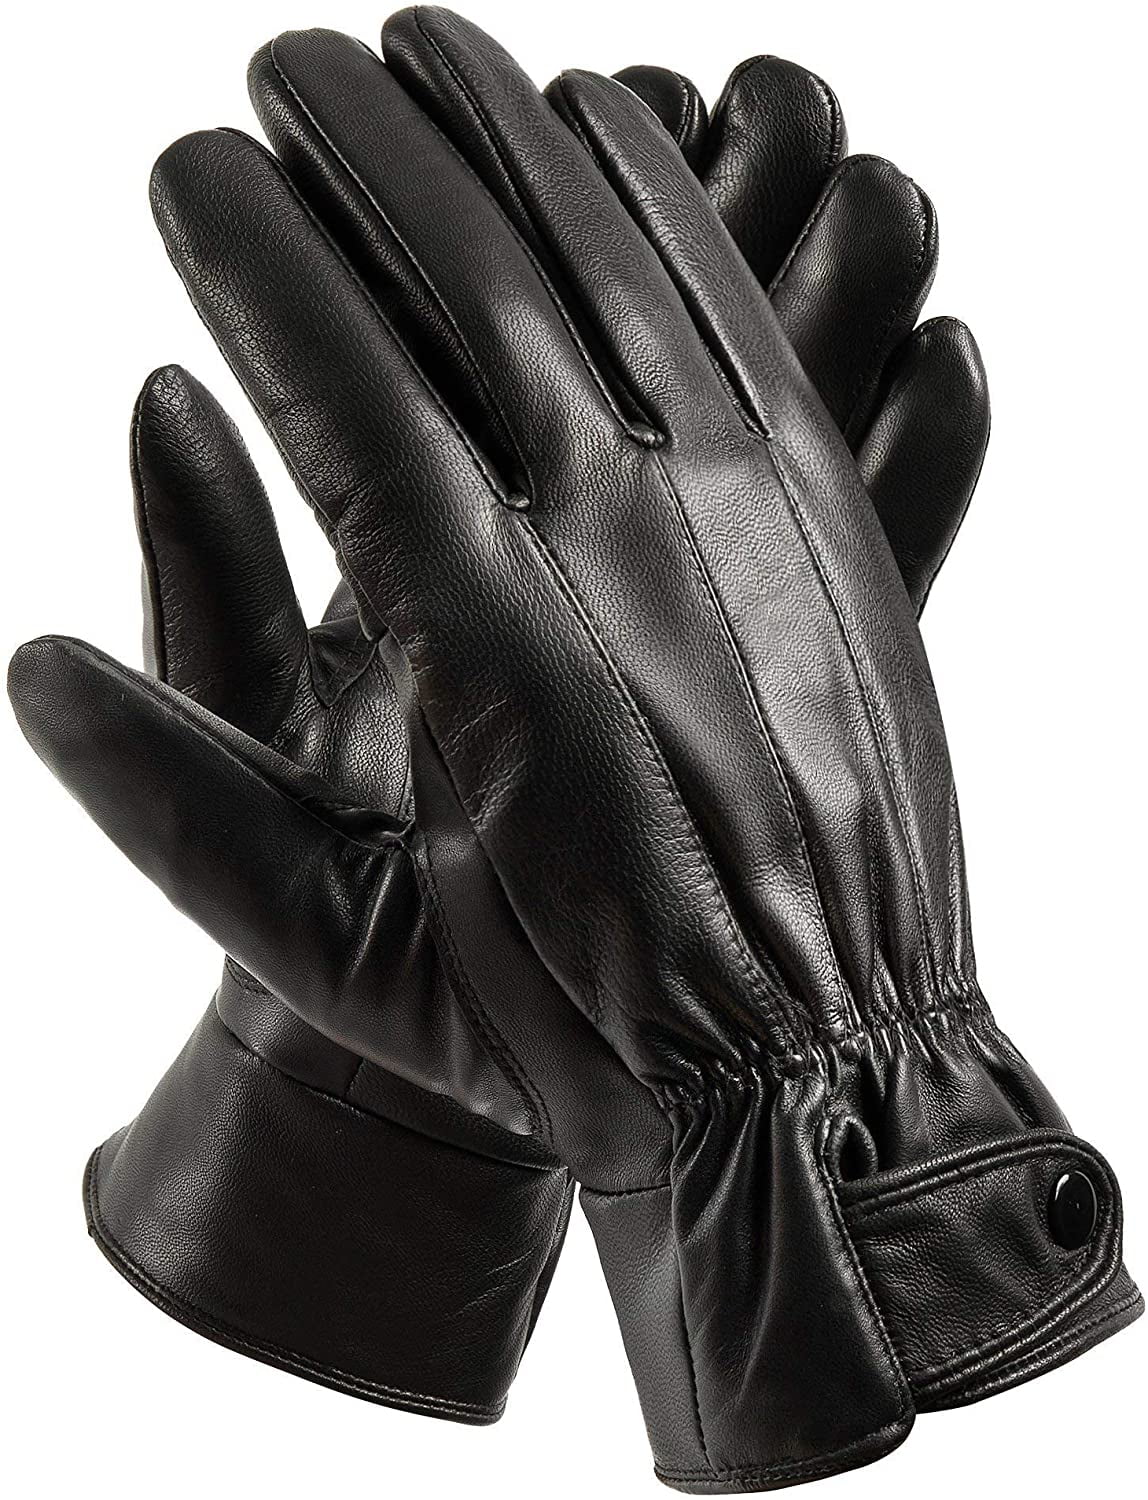 Sheep skin leather driving gloves for Women 